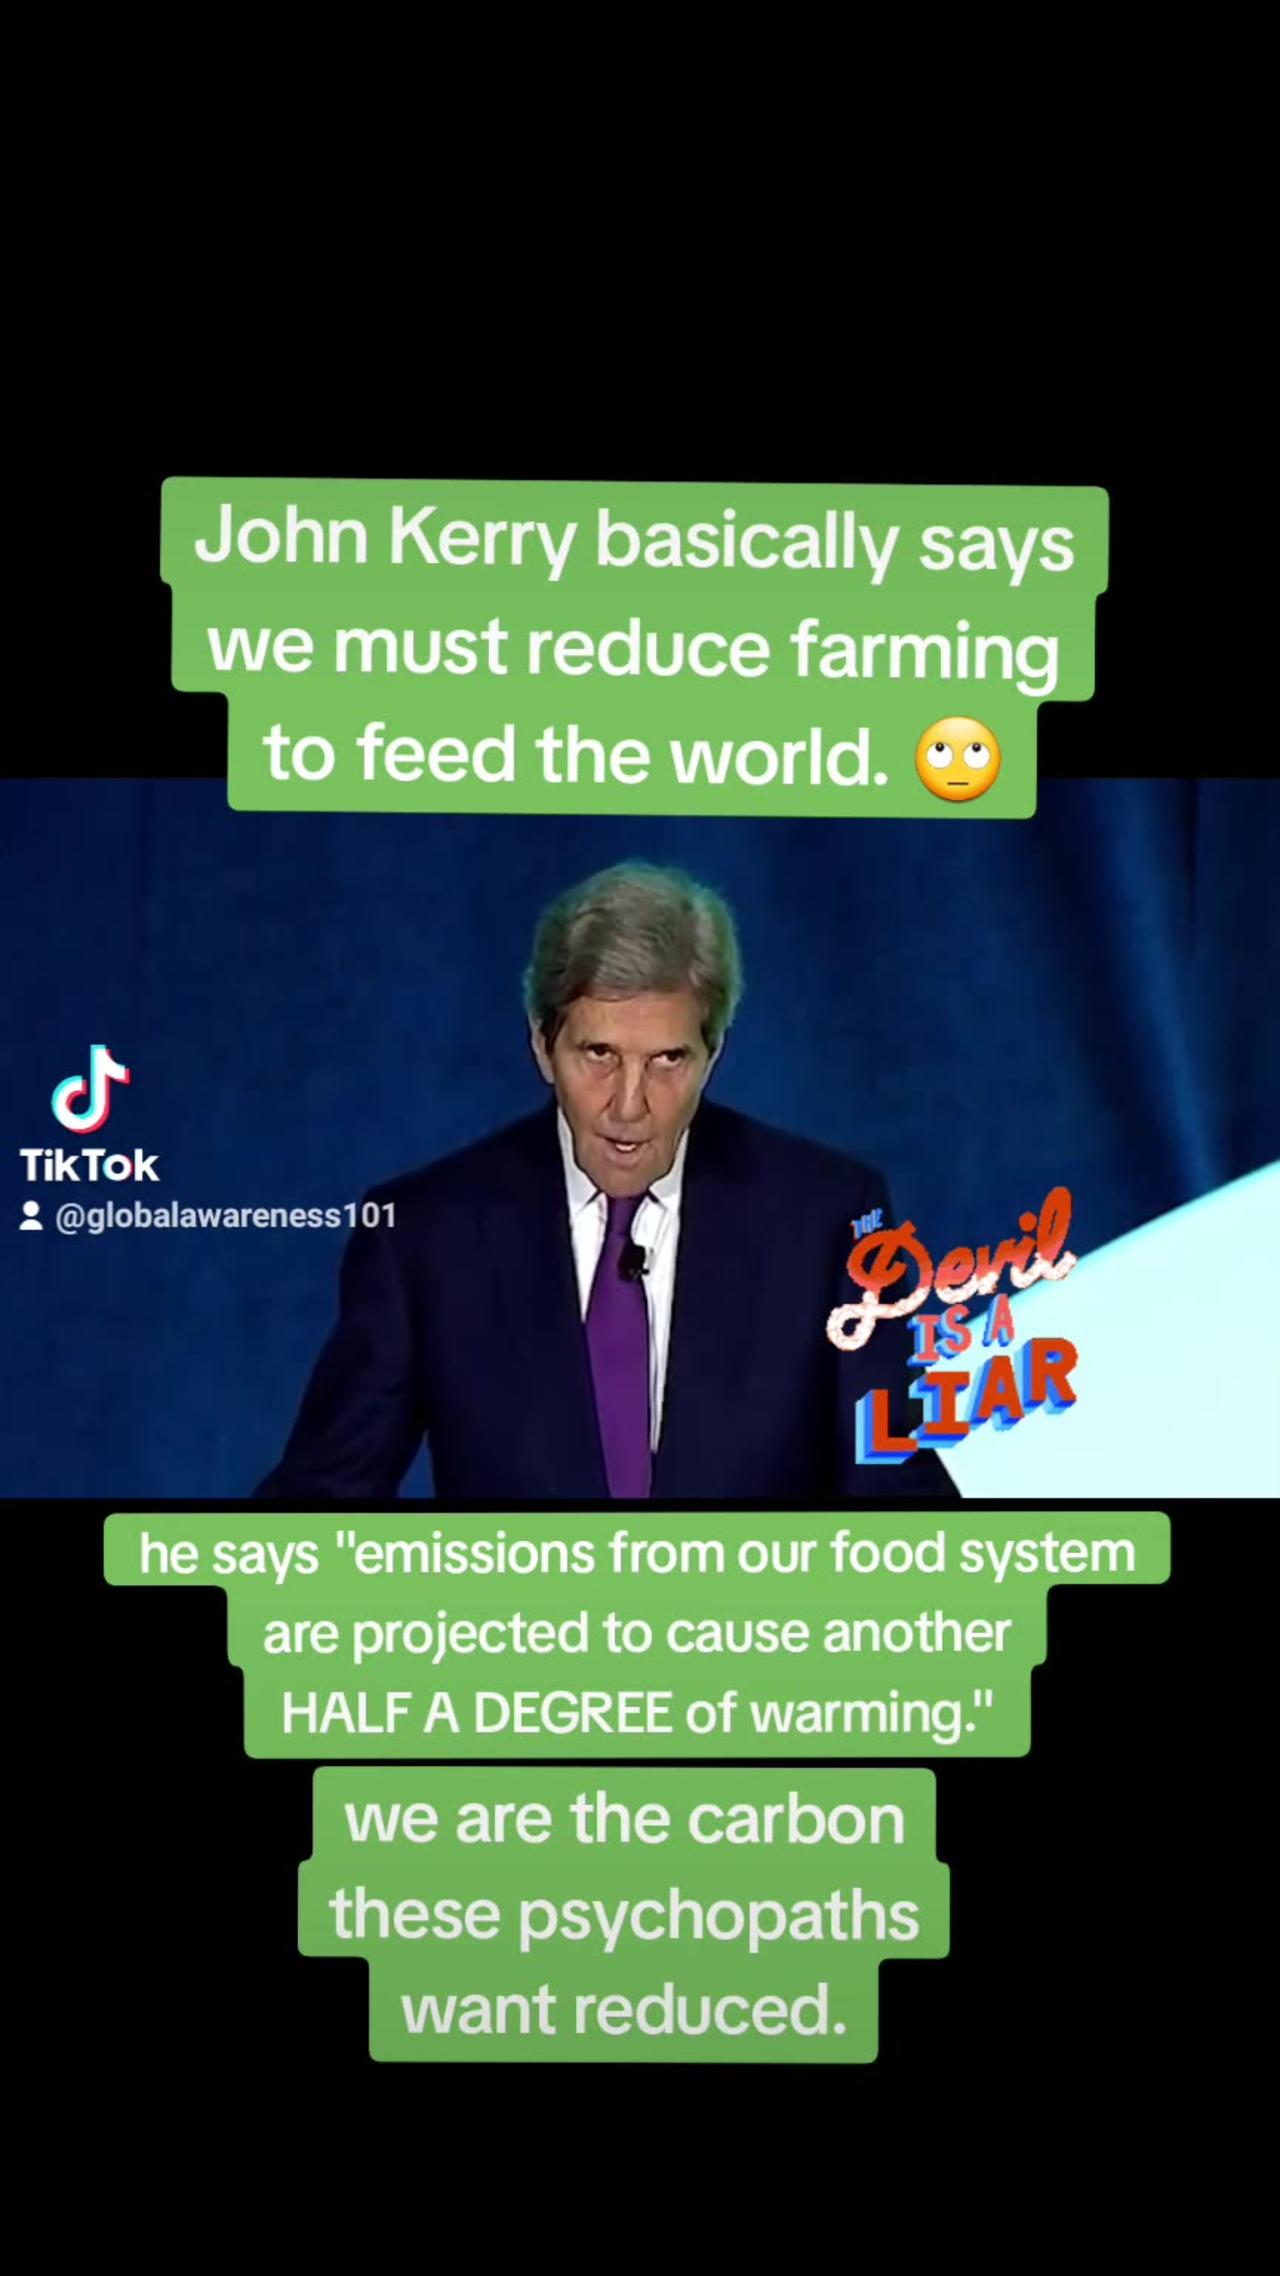 John Kerry Wants To Reduce Farming To Feed The World